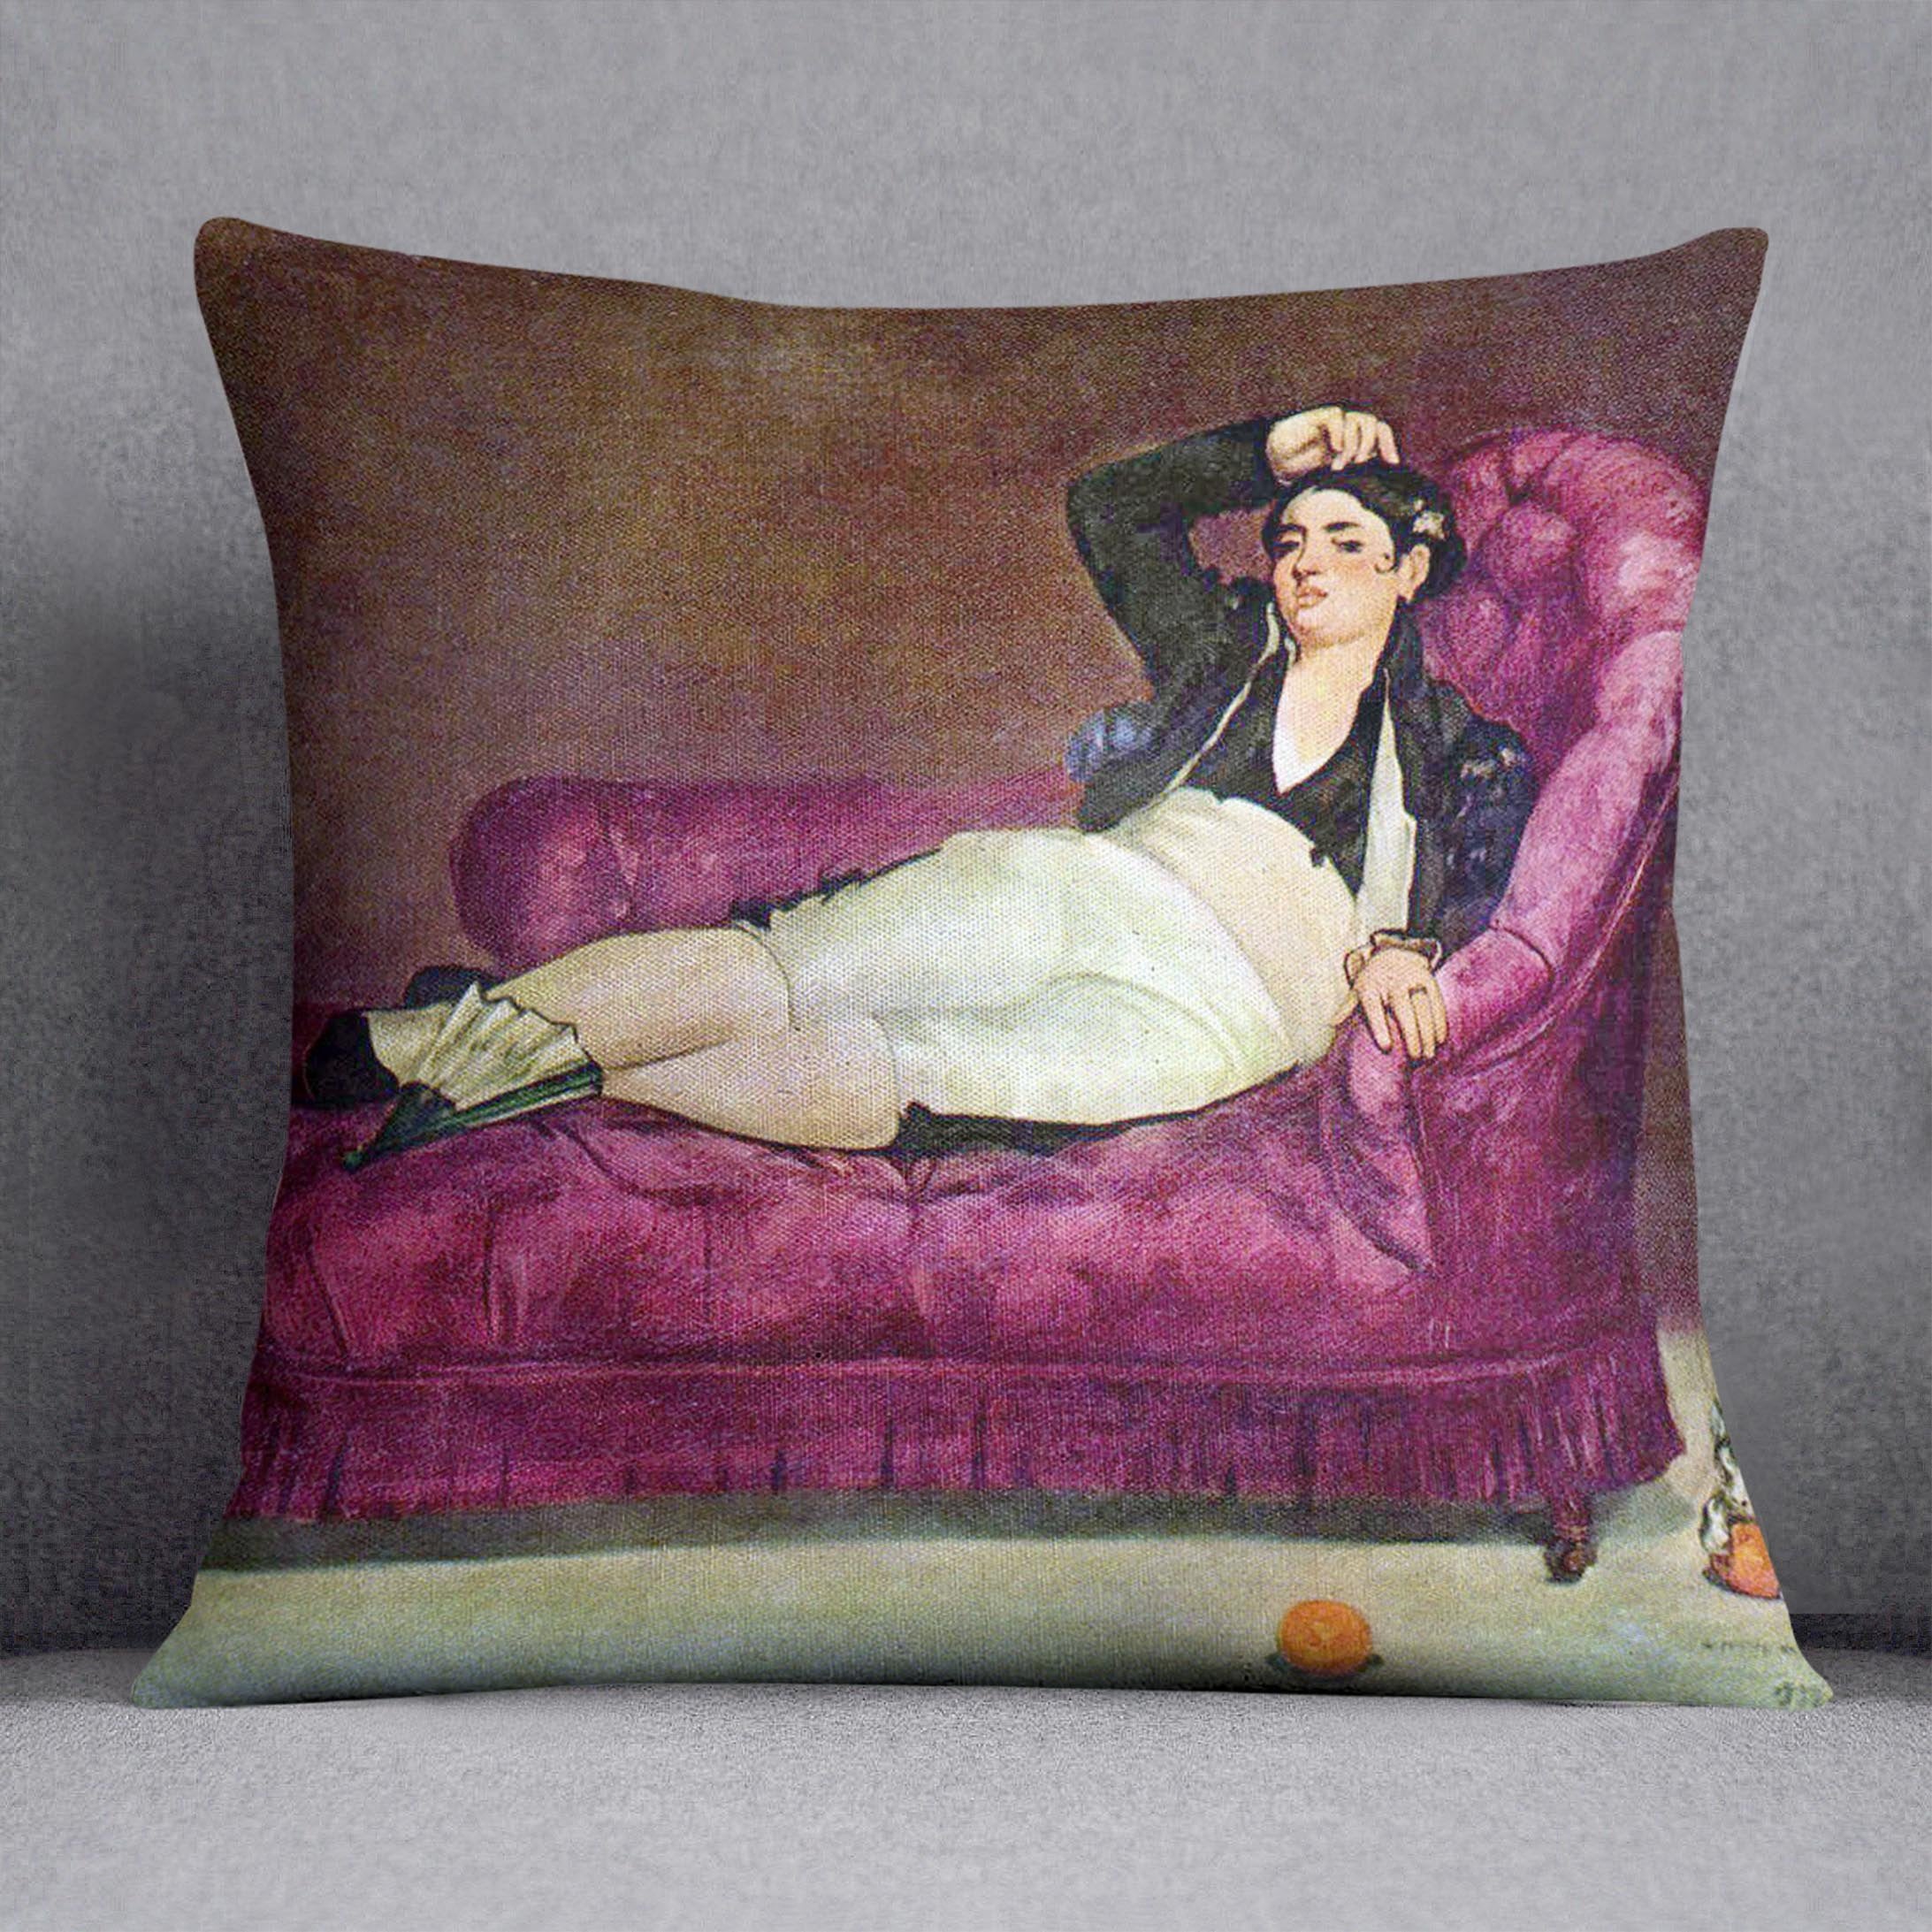 Young woman in Spanish dress by Manet Throw Pillow